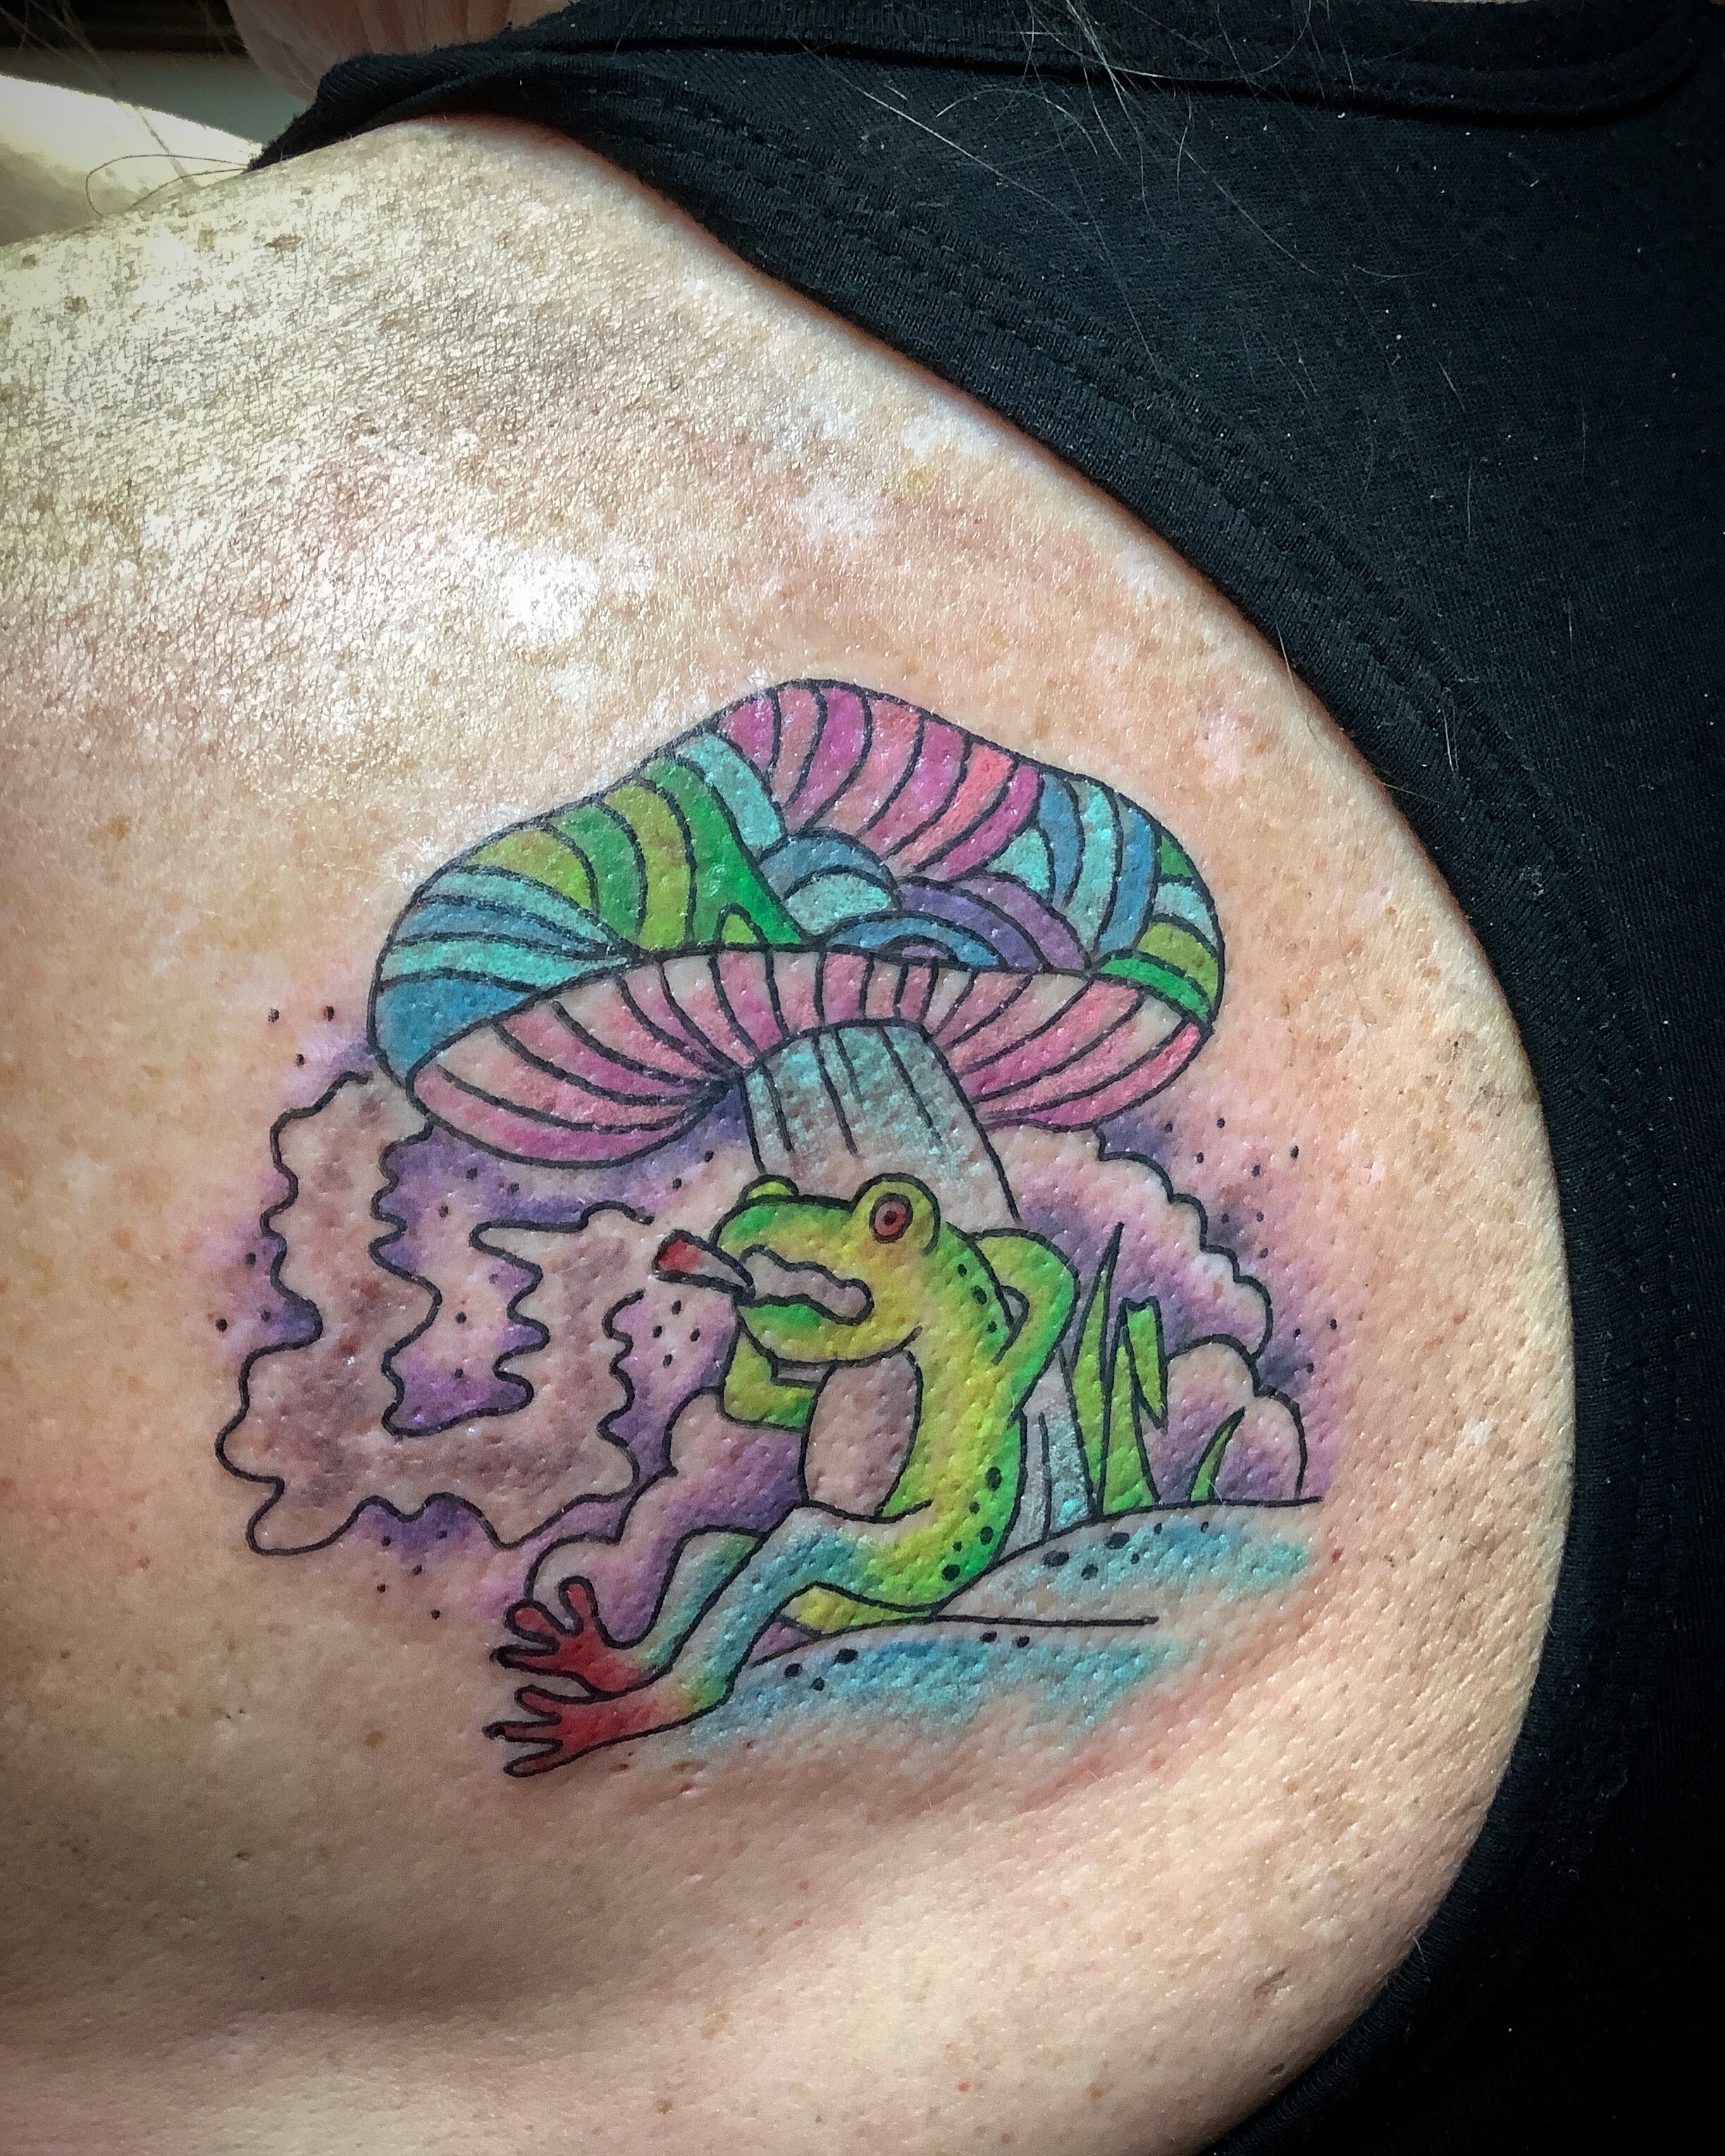 Psychedelic Tattoos - The Newest Craze – Ultimate Tattoo Supply